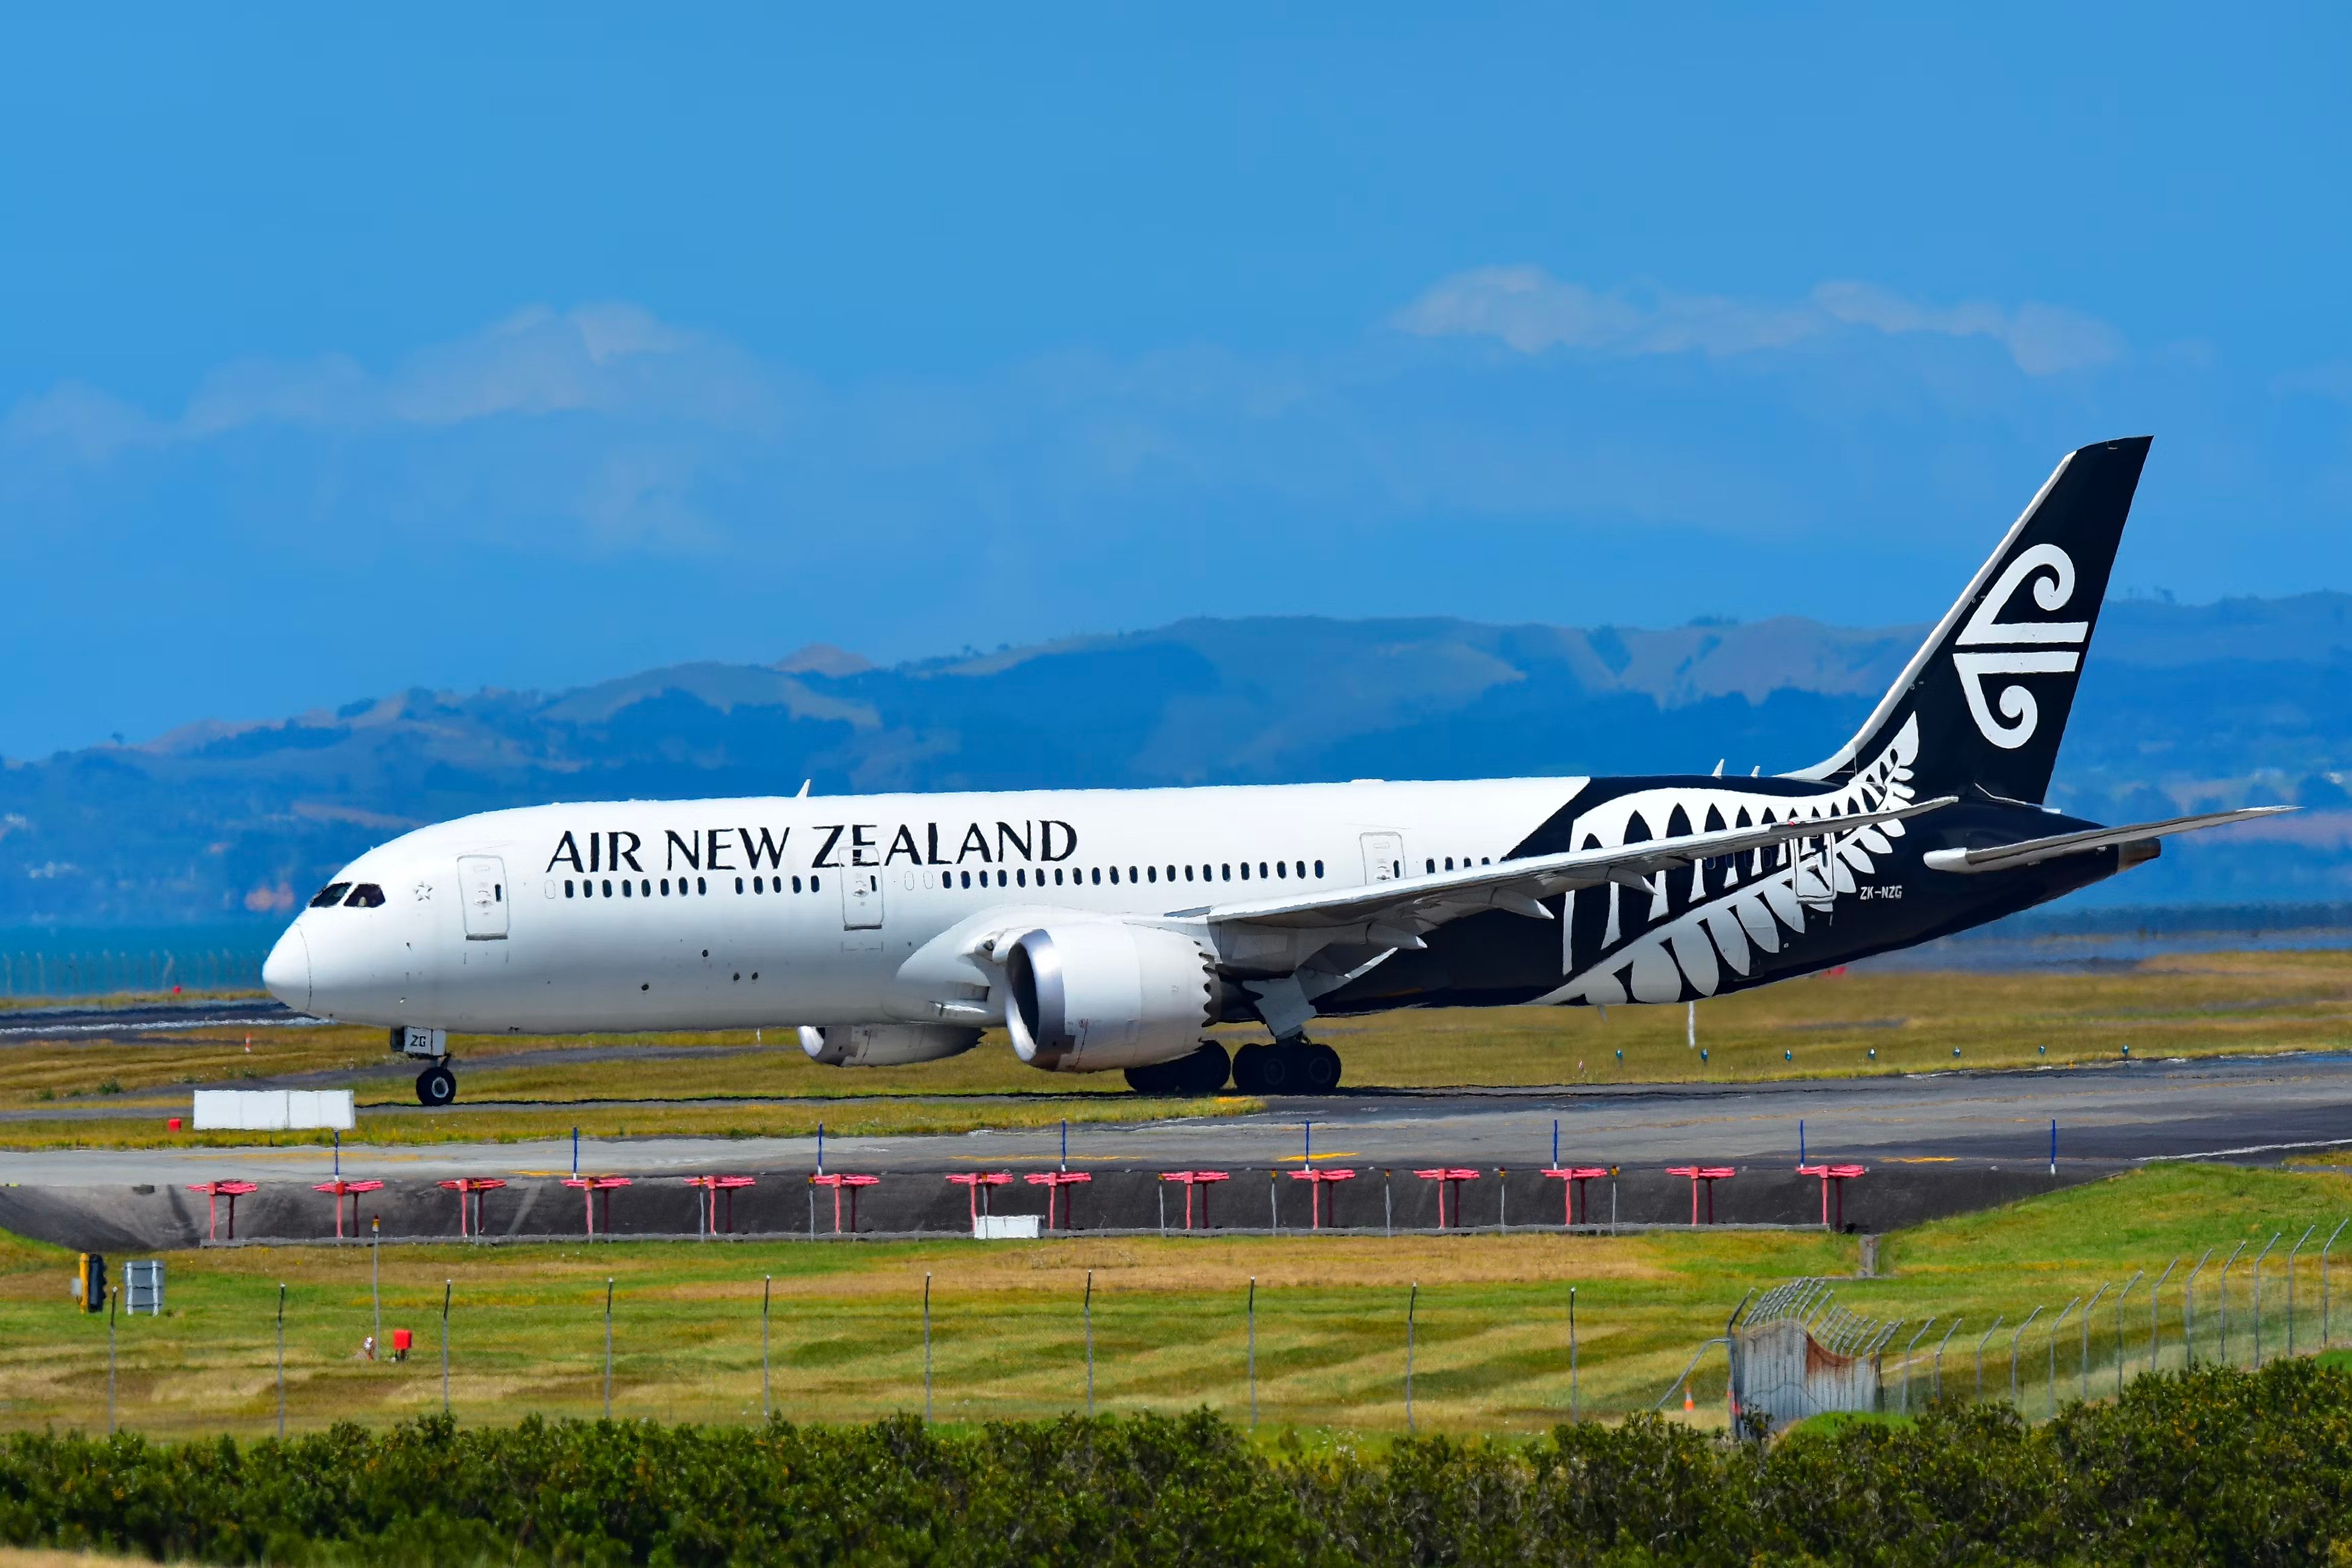 Air New Zealand 787-9 Dreamliner at Auckland Airport